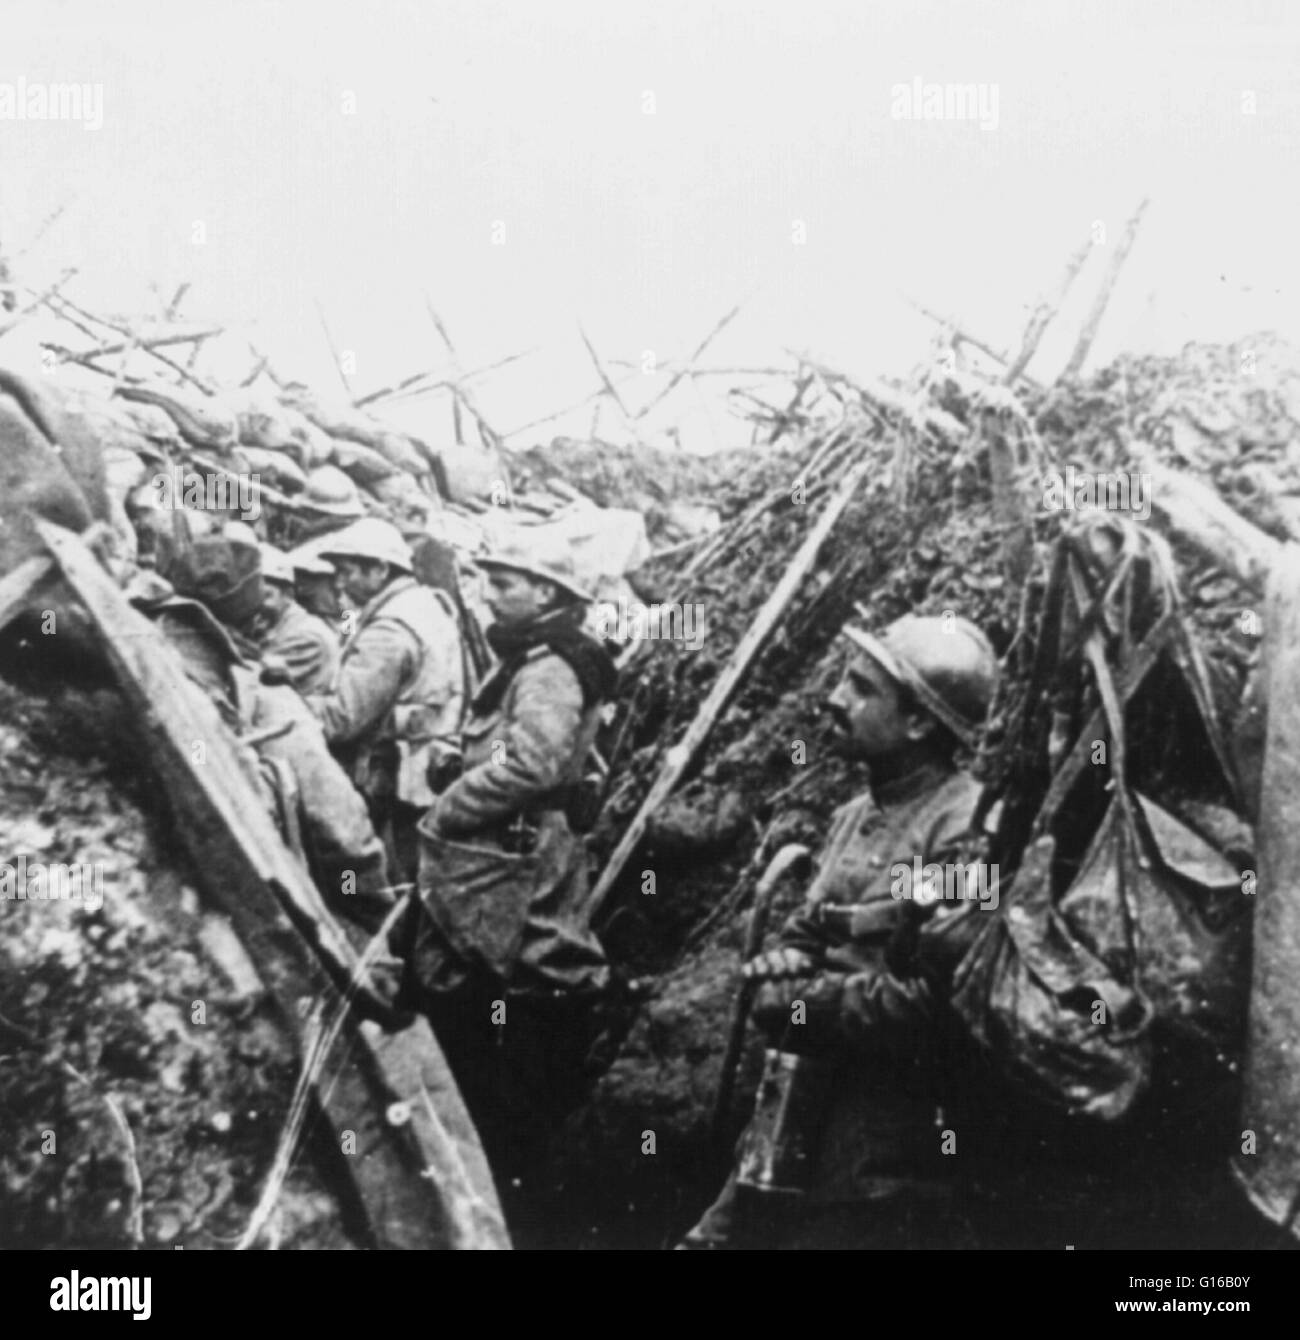 A World War I French departure trench just before zero hour, circa 1914-18. No location given on caption card. Trench warfare is a form of land warfare using occupied fighting lines consisting largely of trenches, in which troops are significantly protect Stock Photo